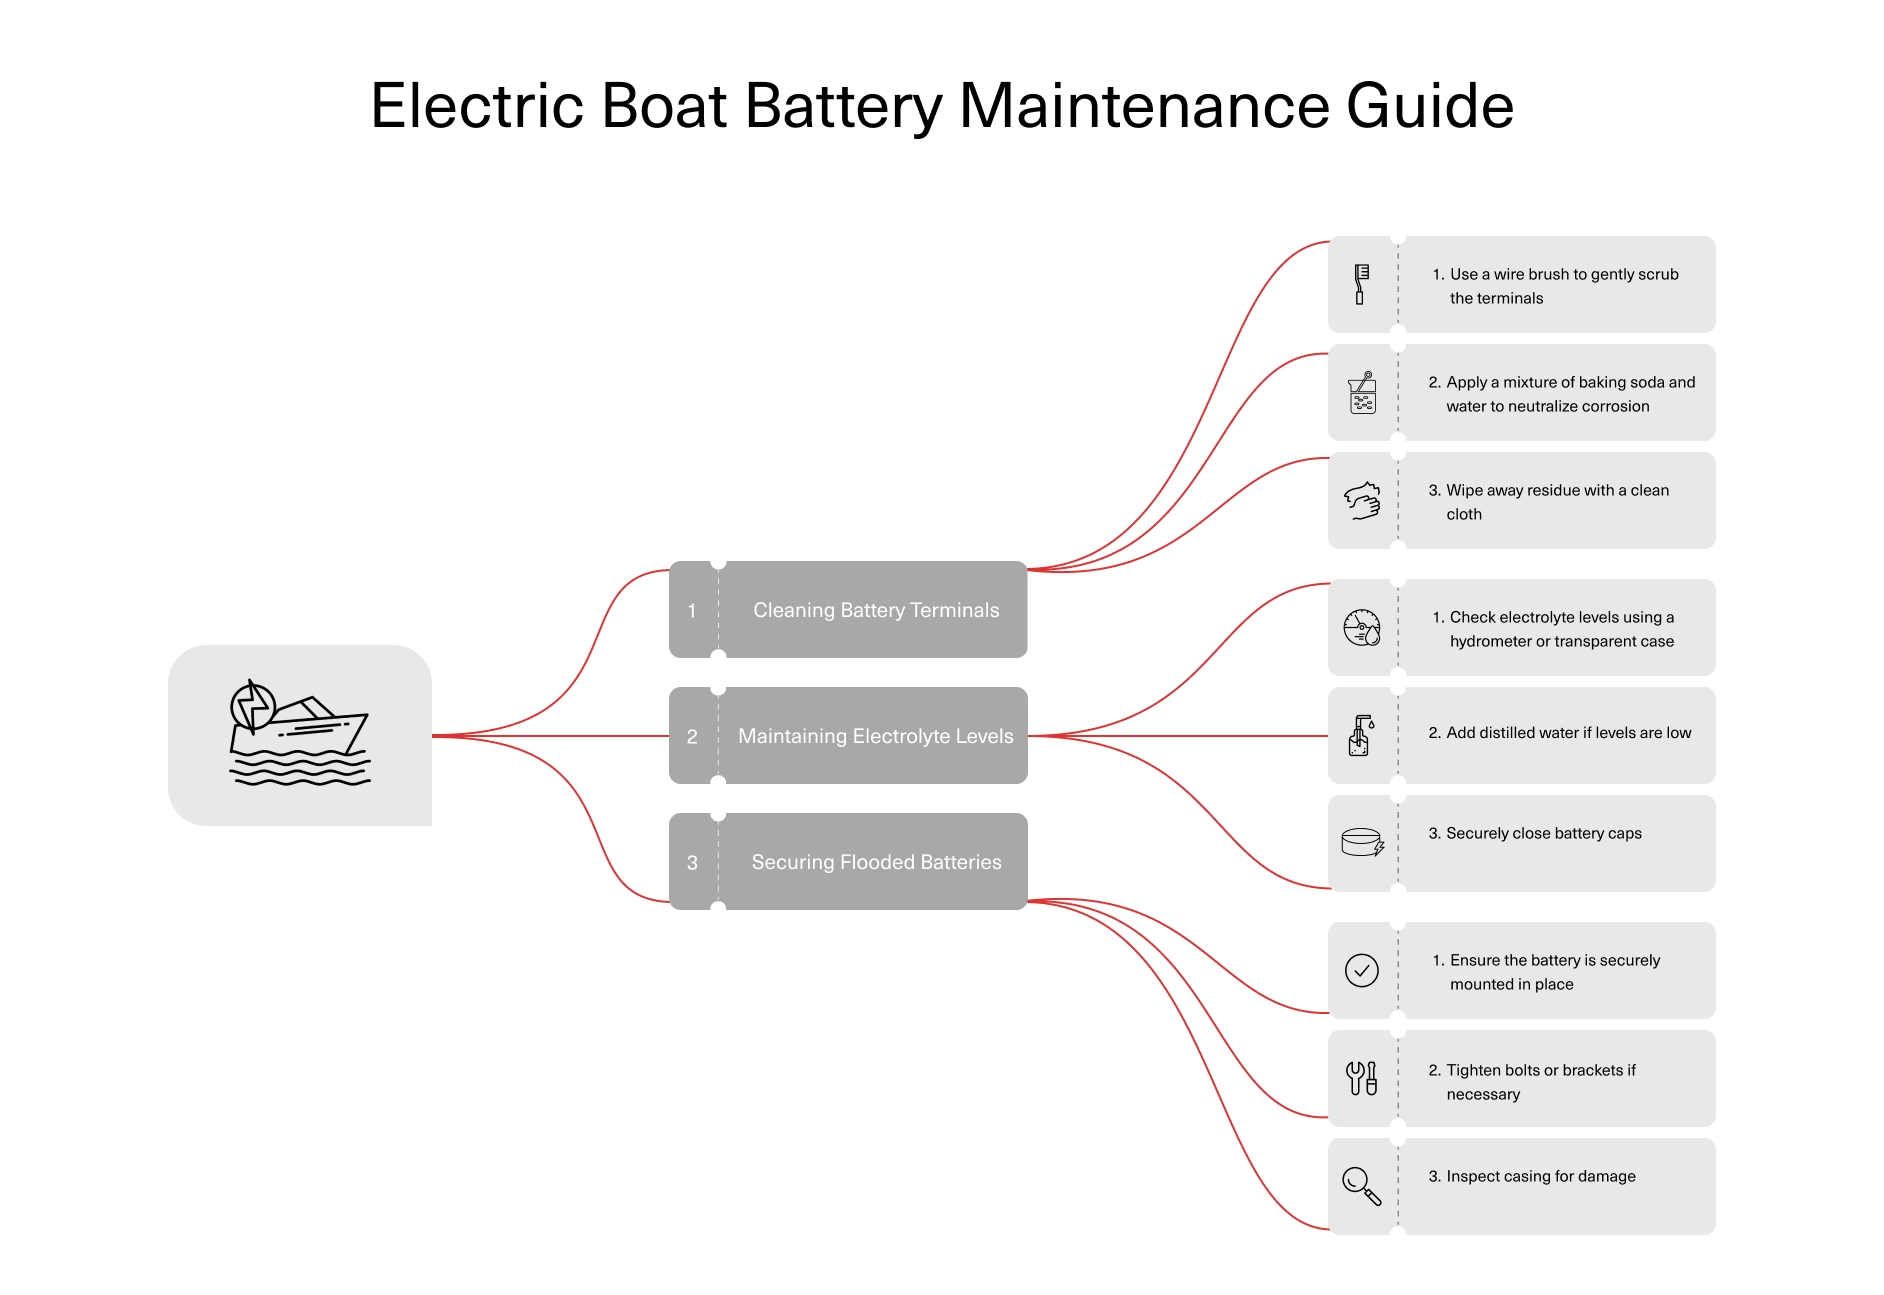 Electric Boat Battery Life Maintenance Guide